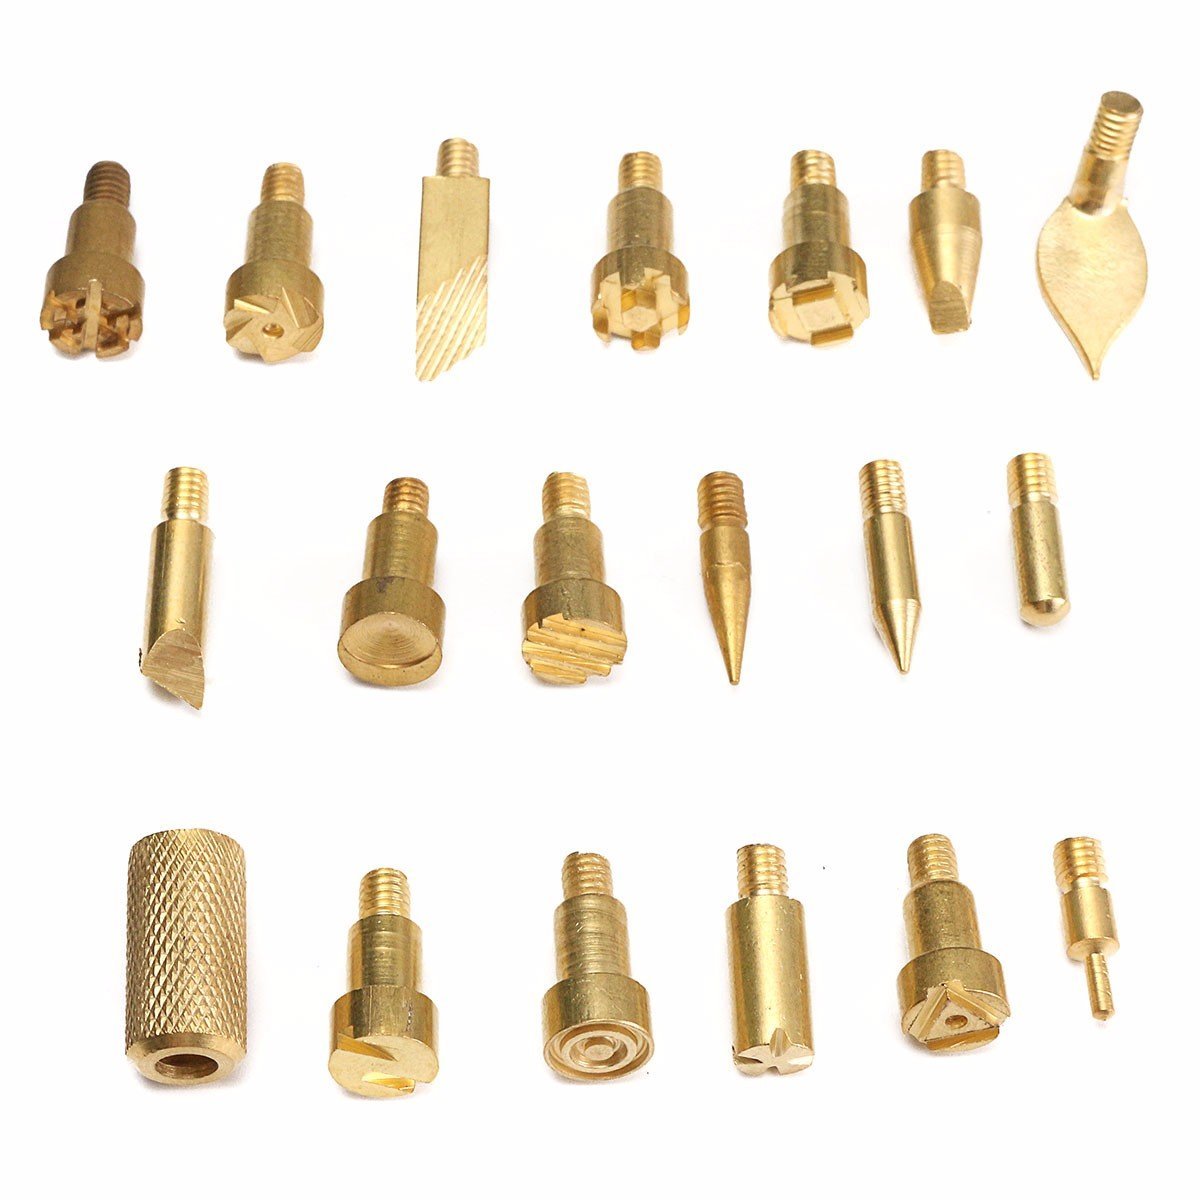 30W-Wood-Burning-24-Pieces-Soldering-Tools-Kit-Pyrography-Set-Brass-with-Tips-1300393-6